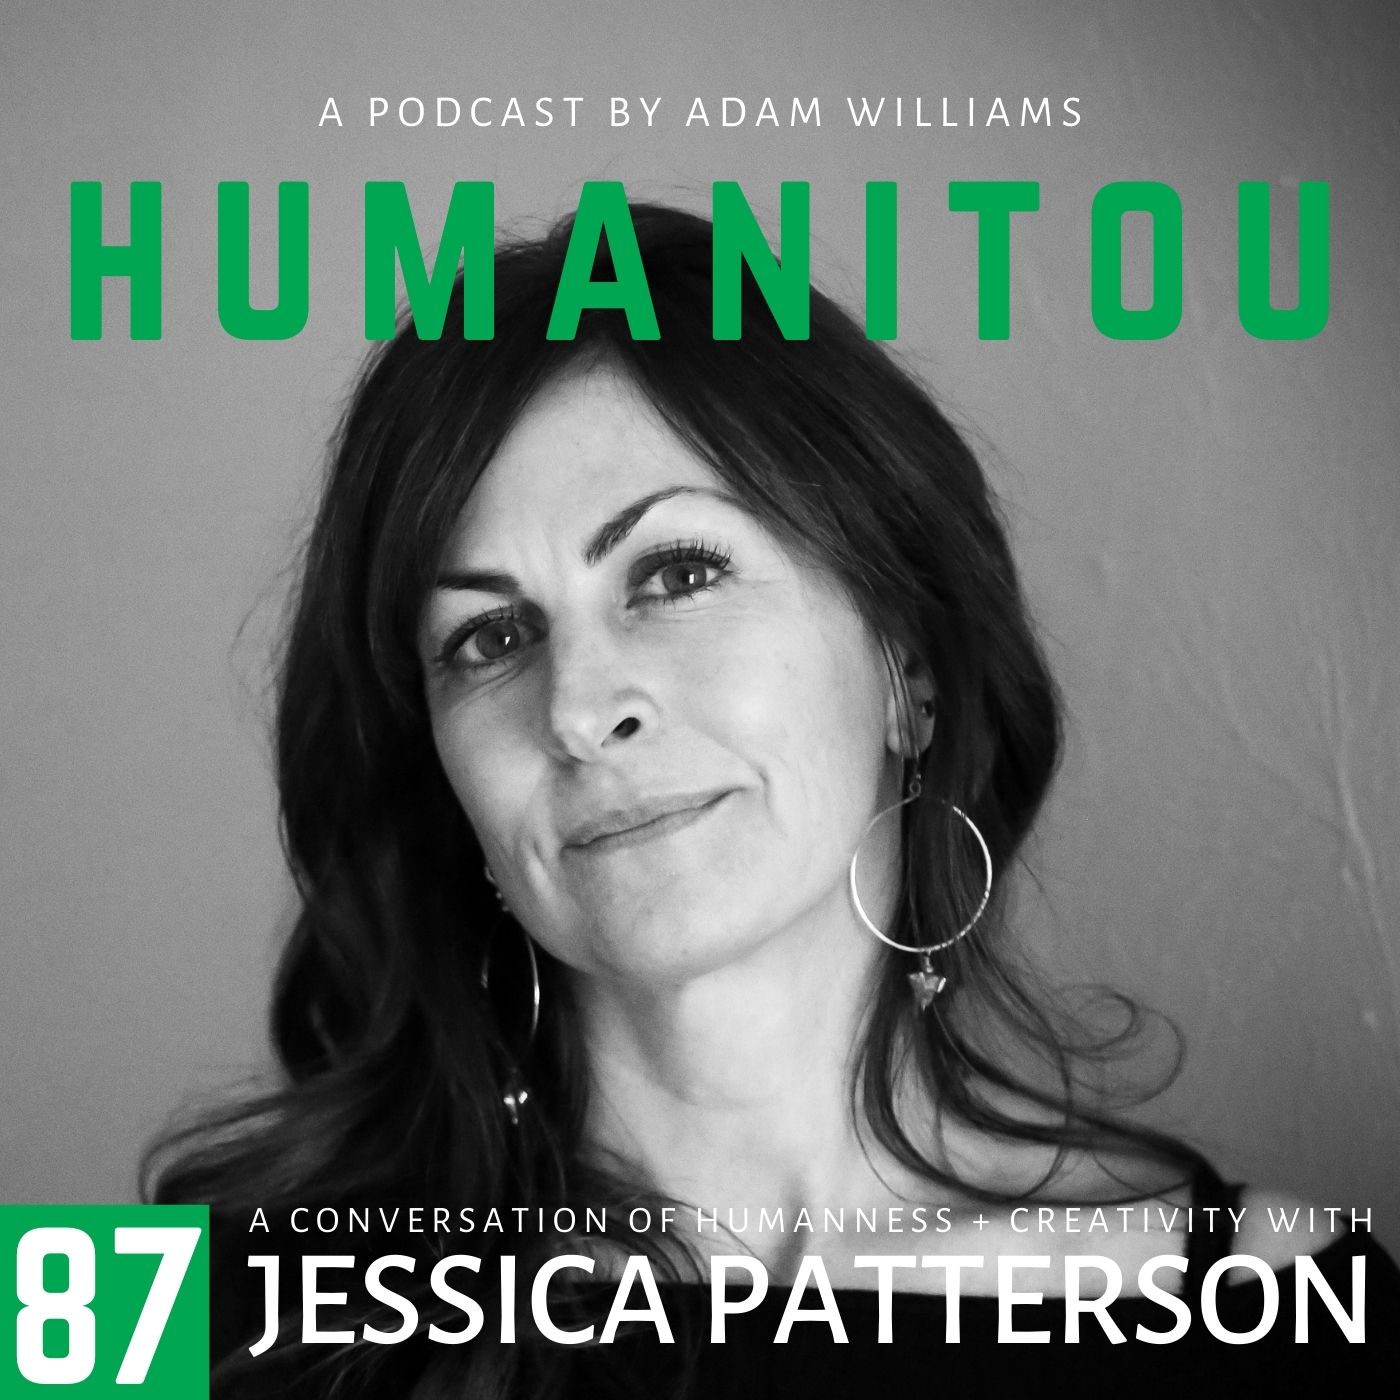 87: Jessica Patterson, writer and teacher, on the spiritual practice of yoga, identity, language, and hope in a time of despair